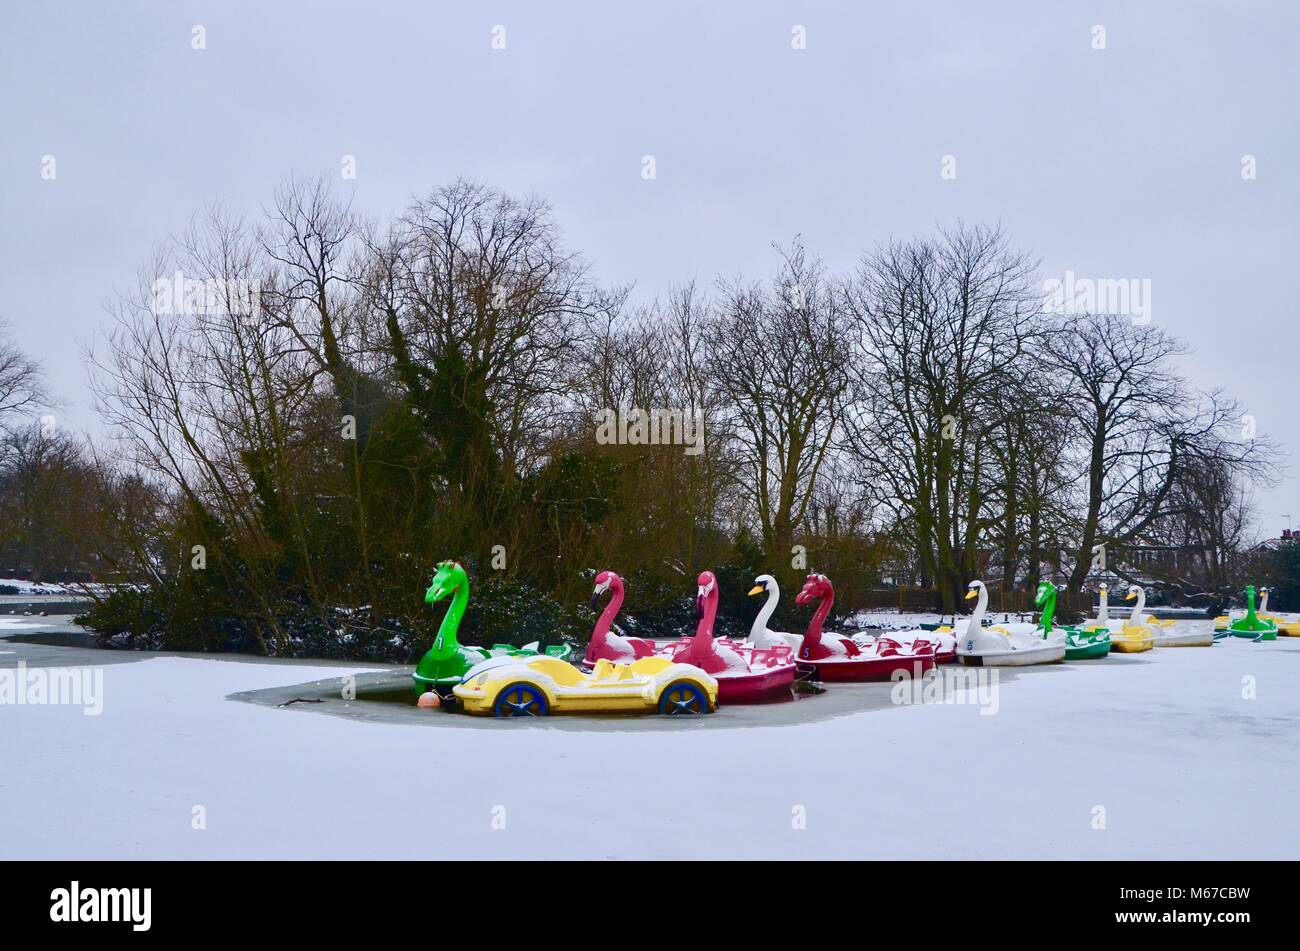 London, UK. 28th Feb, 2018. UK Weather: snow covered boats on the frozen pond in the grounds of north London's historic Alexandra Palace 1st March 2018 Credit: simon leigh/Alamy Live News Stock Photo